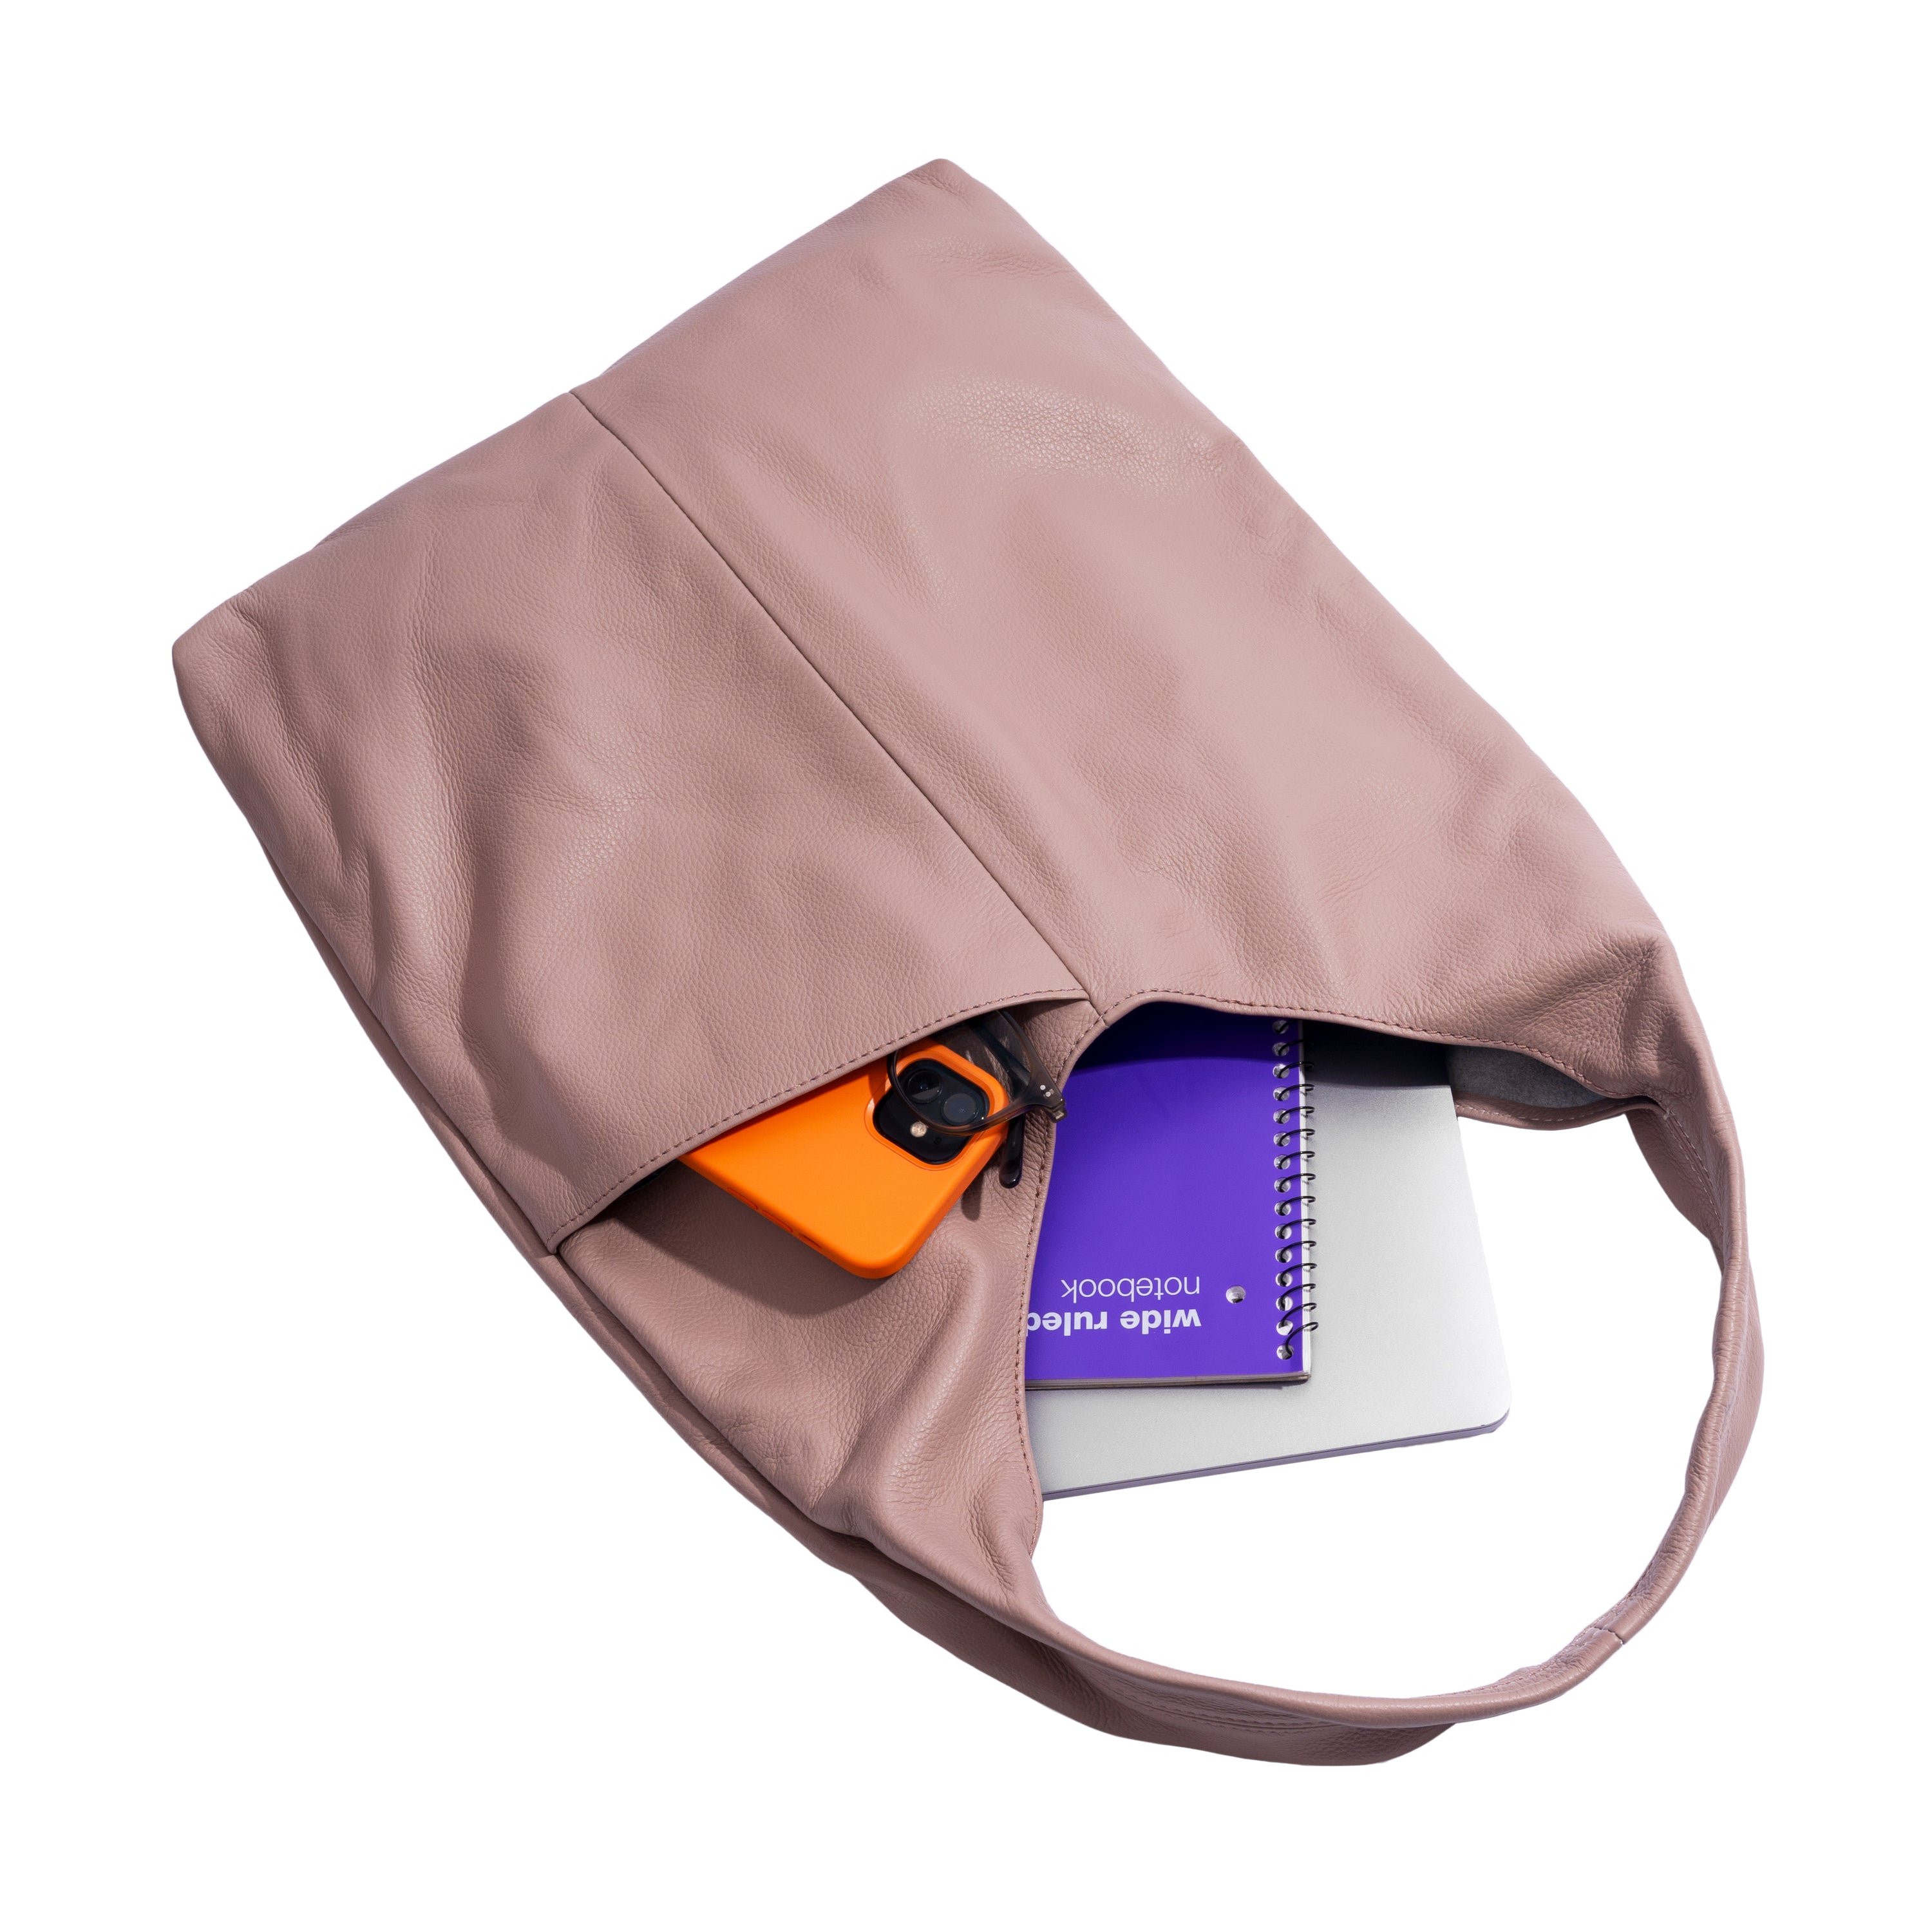 Women's Pouch | Buy Pouches for Women Online - Accessorize India